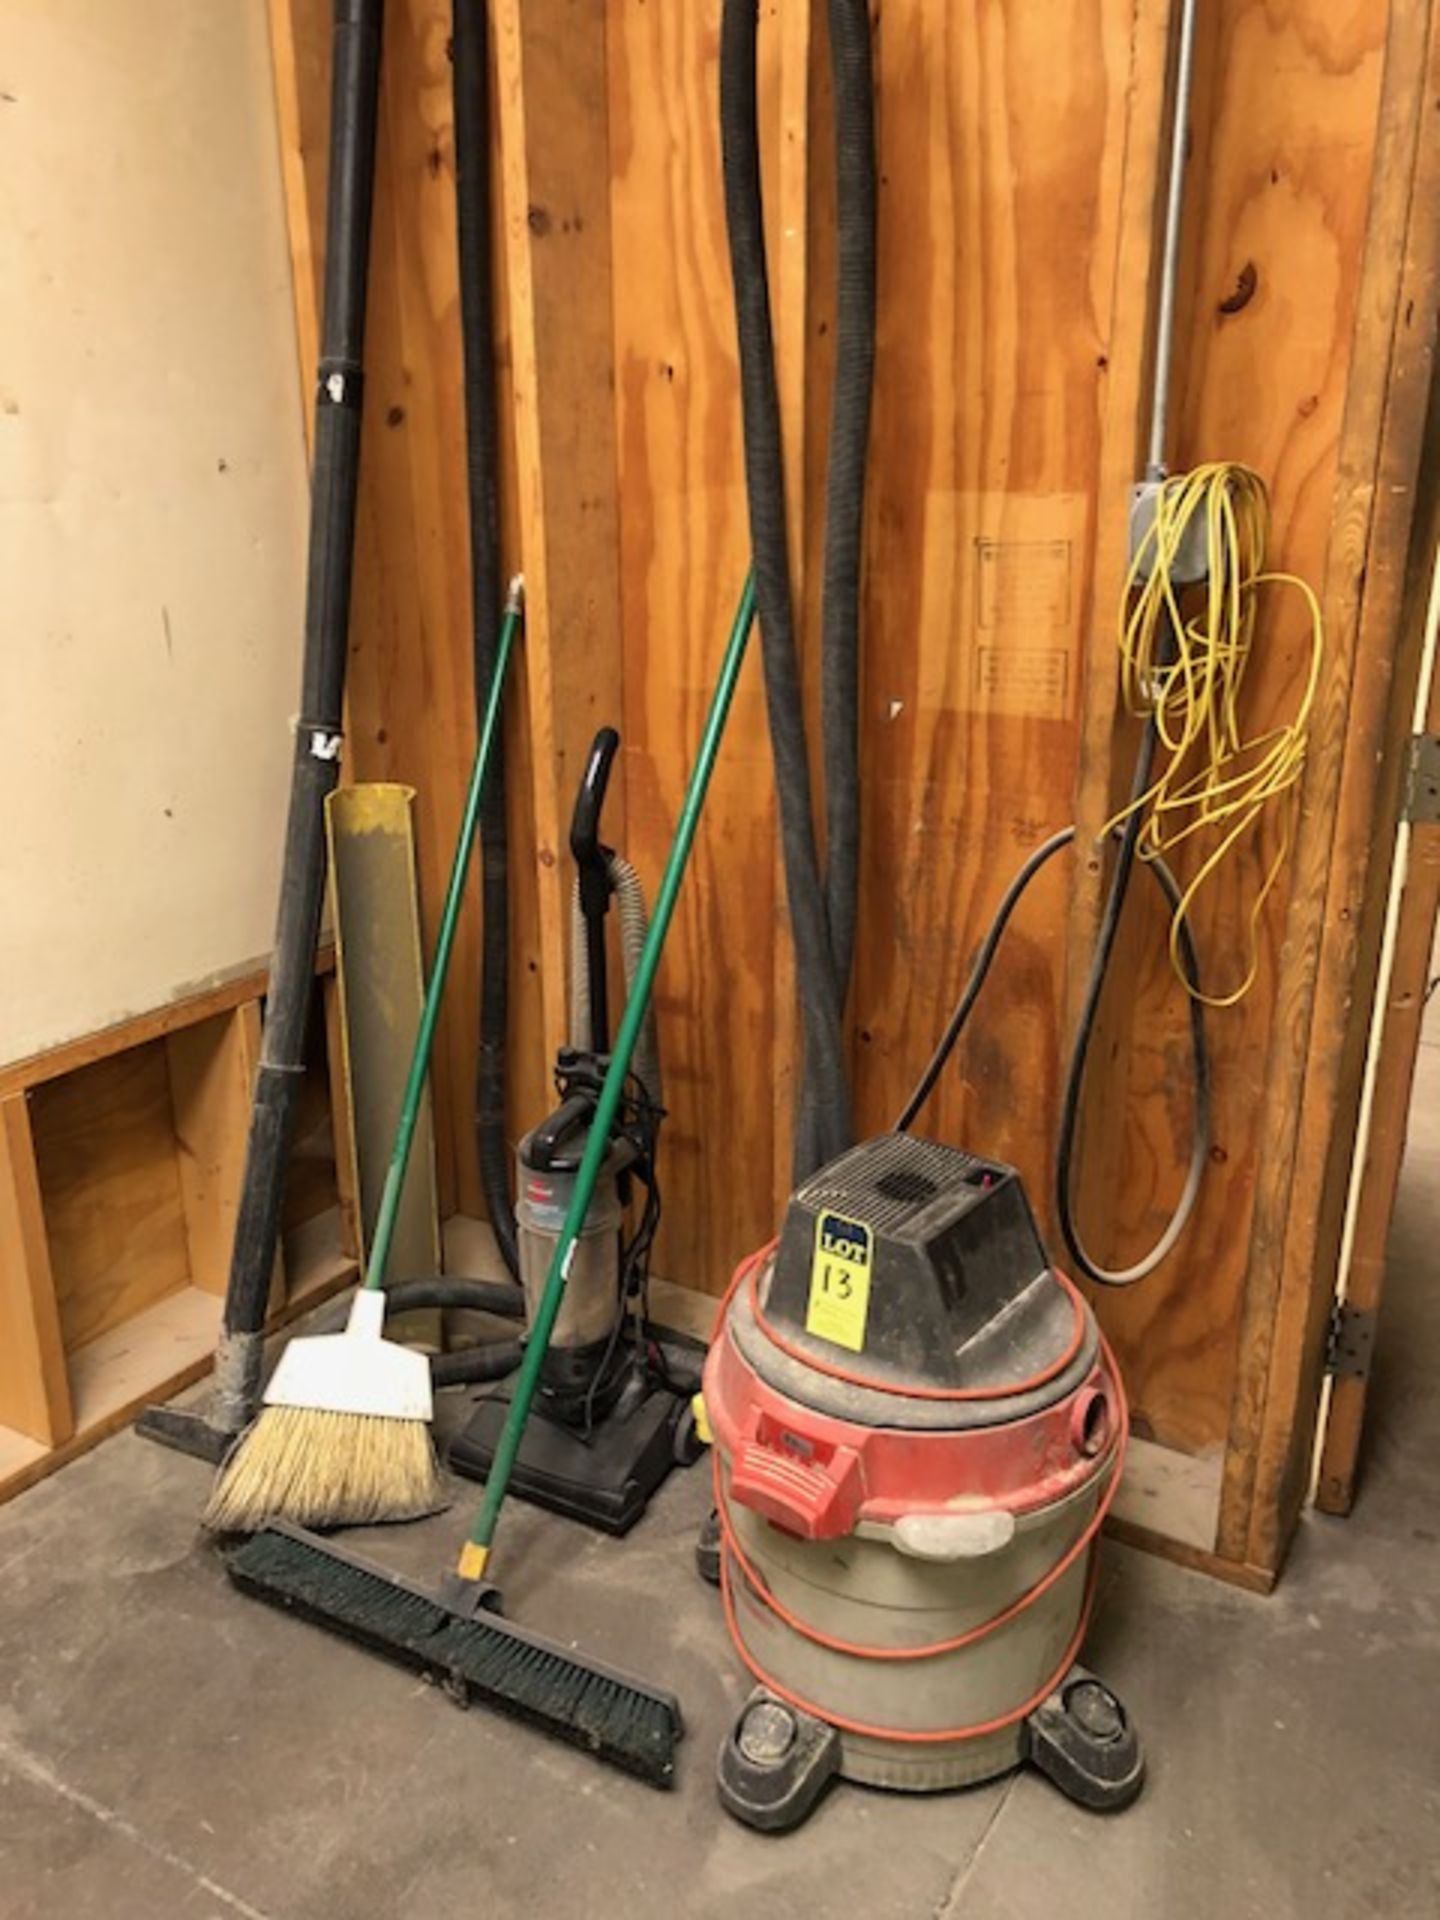 Vacuums and misc in corner - removal available October 26, 2018